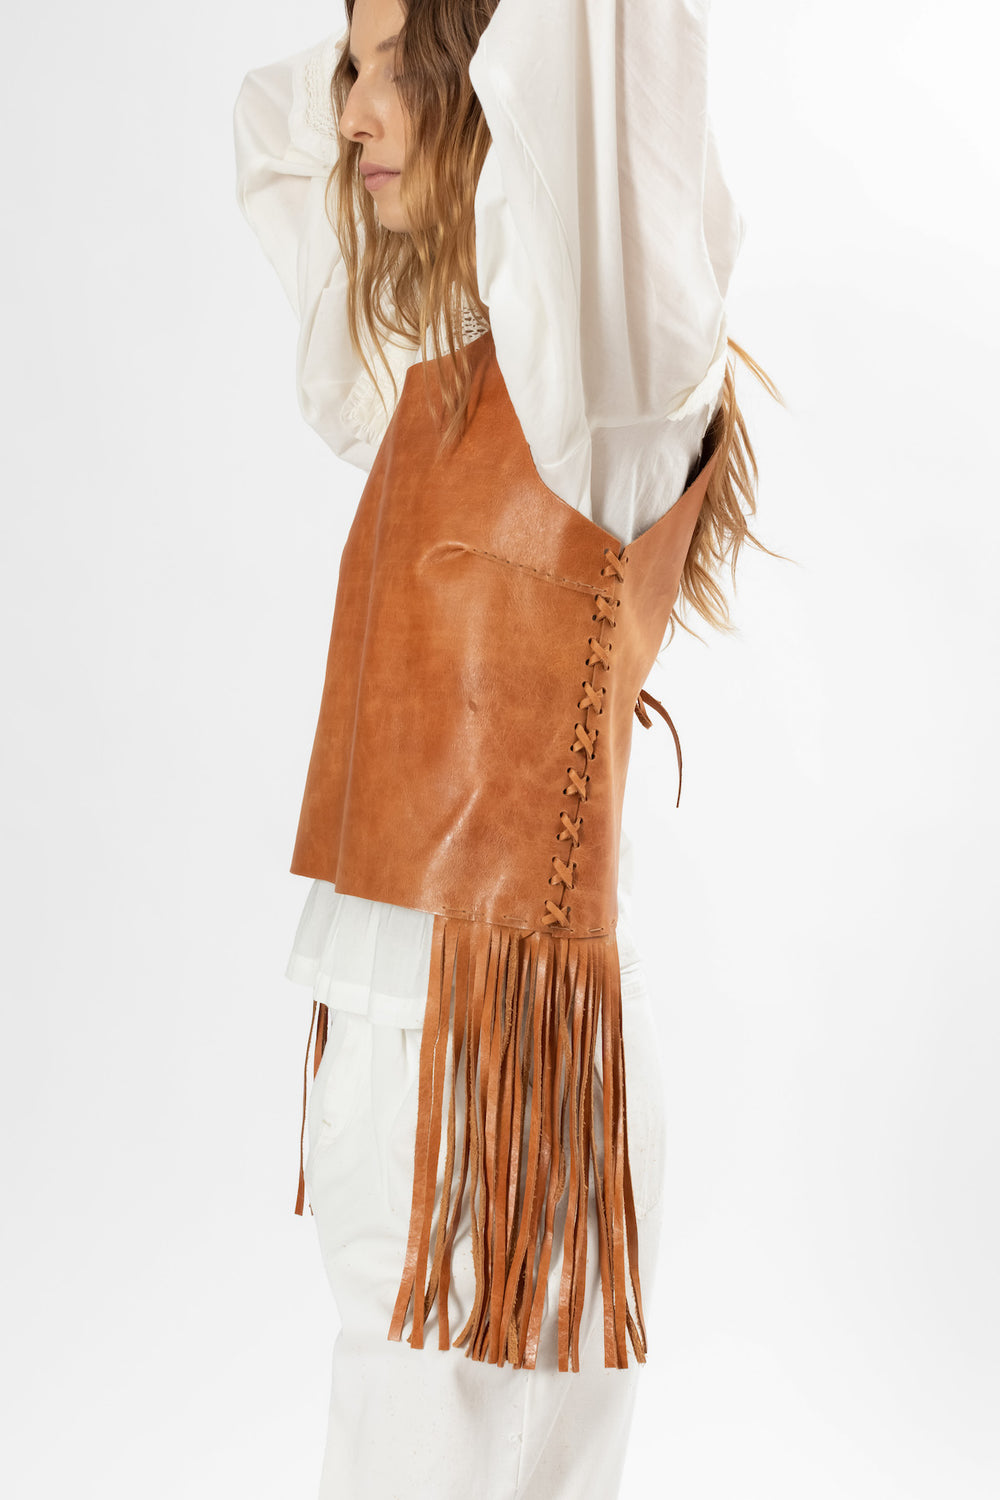 Caramel Leather top with fringes. Hand Matters.